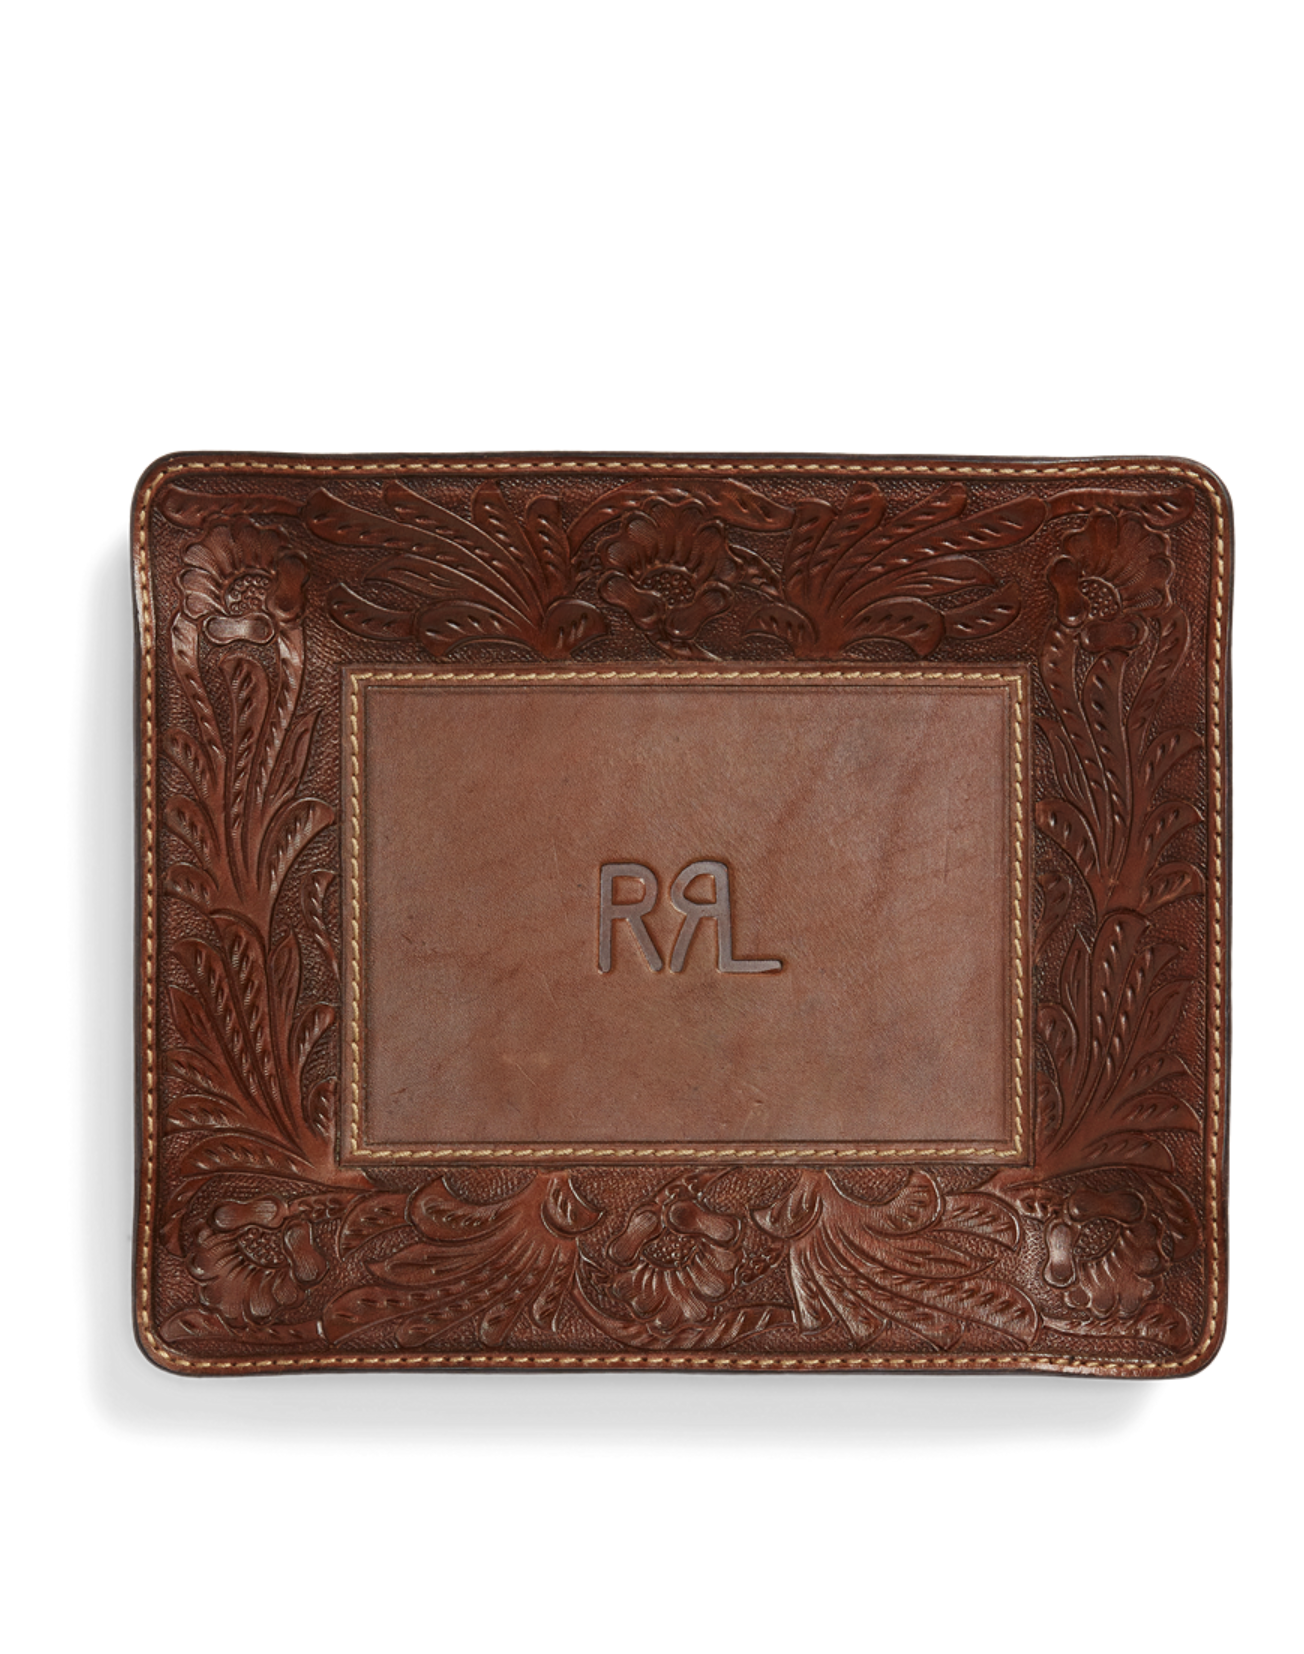 RRL Leather Valet Tray